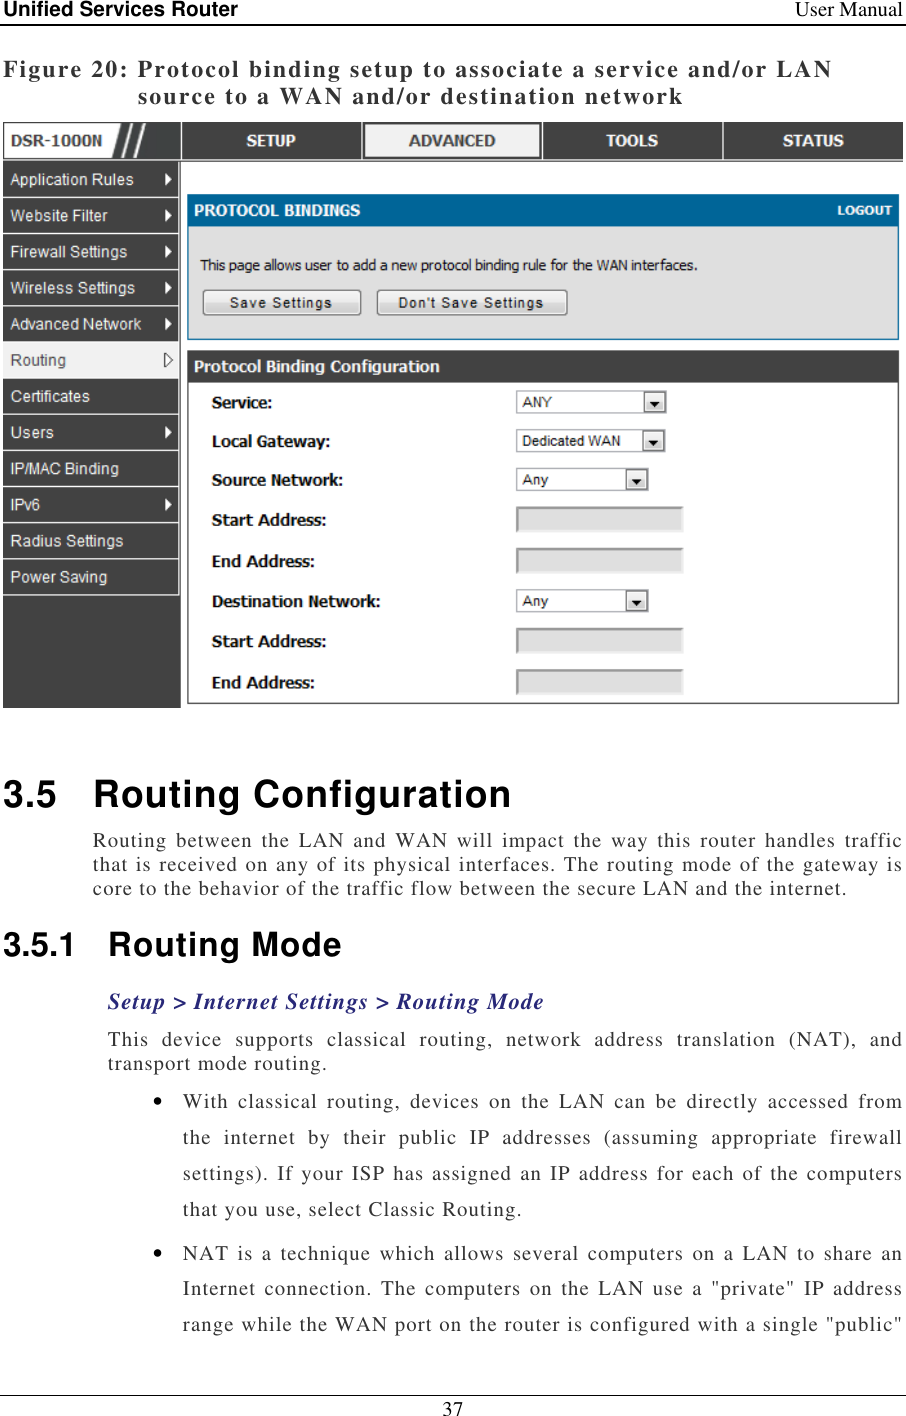 Unified Services Router    User Manual 37  Figure 20: Protocol binding setup to associate a service and/or LAN source to a WAN and/or destination network   3.5  Routing Configuration Routing  between  the  LAN  and  WAN  will  impact  the  way  this  router  handles  traffic that is received on any of its physical interfaces. The routing mode of the gateway is core to the behavior of the traffic flow between the secure LAN and the internet.  3.5.1  Routing Mode Setup &gt; Internet Settings &gt; Routing Mode This  device  supports  classical  routing,  network  address  translation  (NAT),  and transport mode routing.  • With  classical  routing,  devices  on  the  LAN  can  be  directly  accessed  from the  internet  by  their  public  IP  addresses  (assuming  appropriate  firewall settings). If your  ISP has assigned  an IP address  for each  of  the computers that you use, select Classic Routing.  • NAT  is  a technique which  allows several  computers on  a  LAN to  share  an Internet  connection.  The  computers on  the  LAN  use  a  &quot;private&quot;  IP  address range while the WAN port on the router is configured with a single &quot;public&quot; 